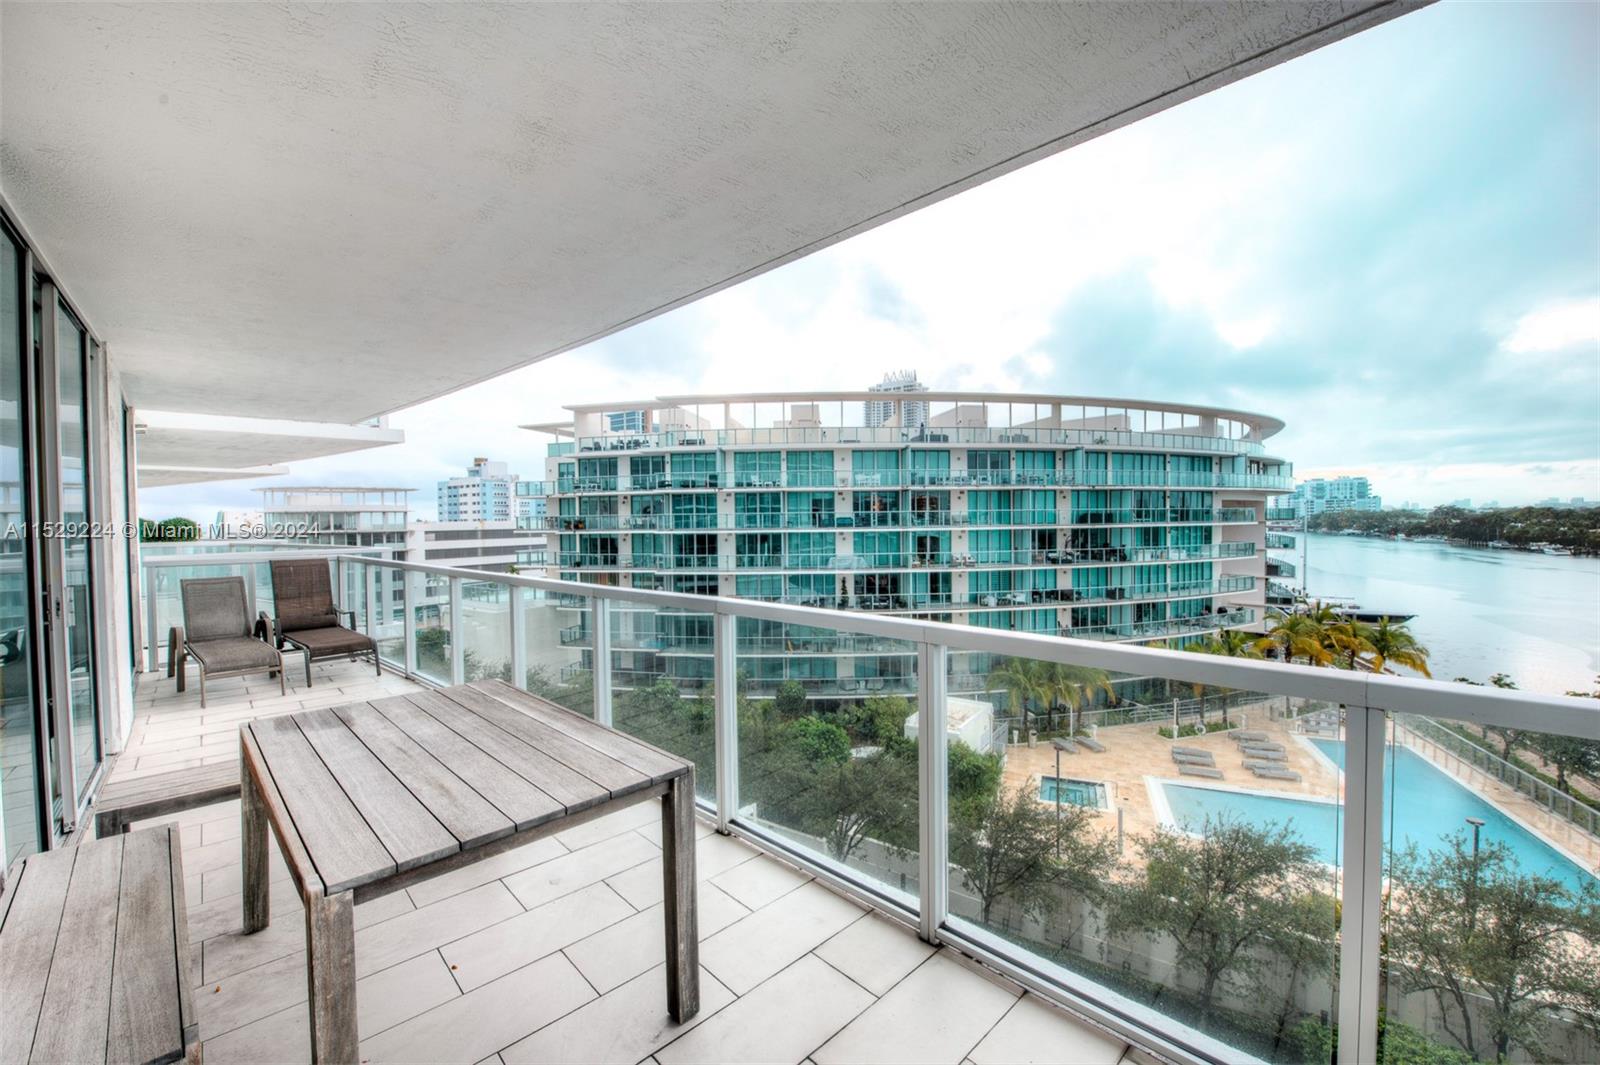 Beautiful 2BR/ 2B overlooking Allison Island and Miami Intercoastal water ways. Unit comes fully furnished. 24HR valet, swimming pool and Exercise room. 2min walk to Miami Beach and an array of International Cuisines. Located just 5min drive from South Beach. Available March 11th